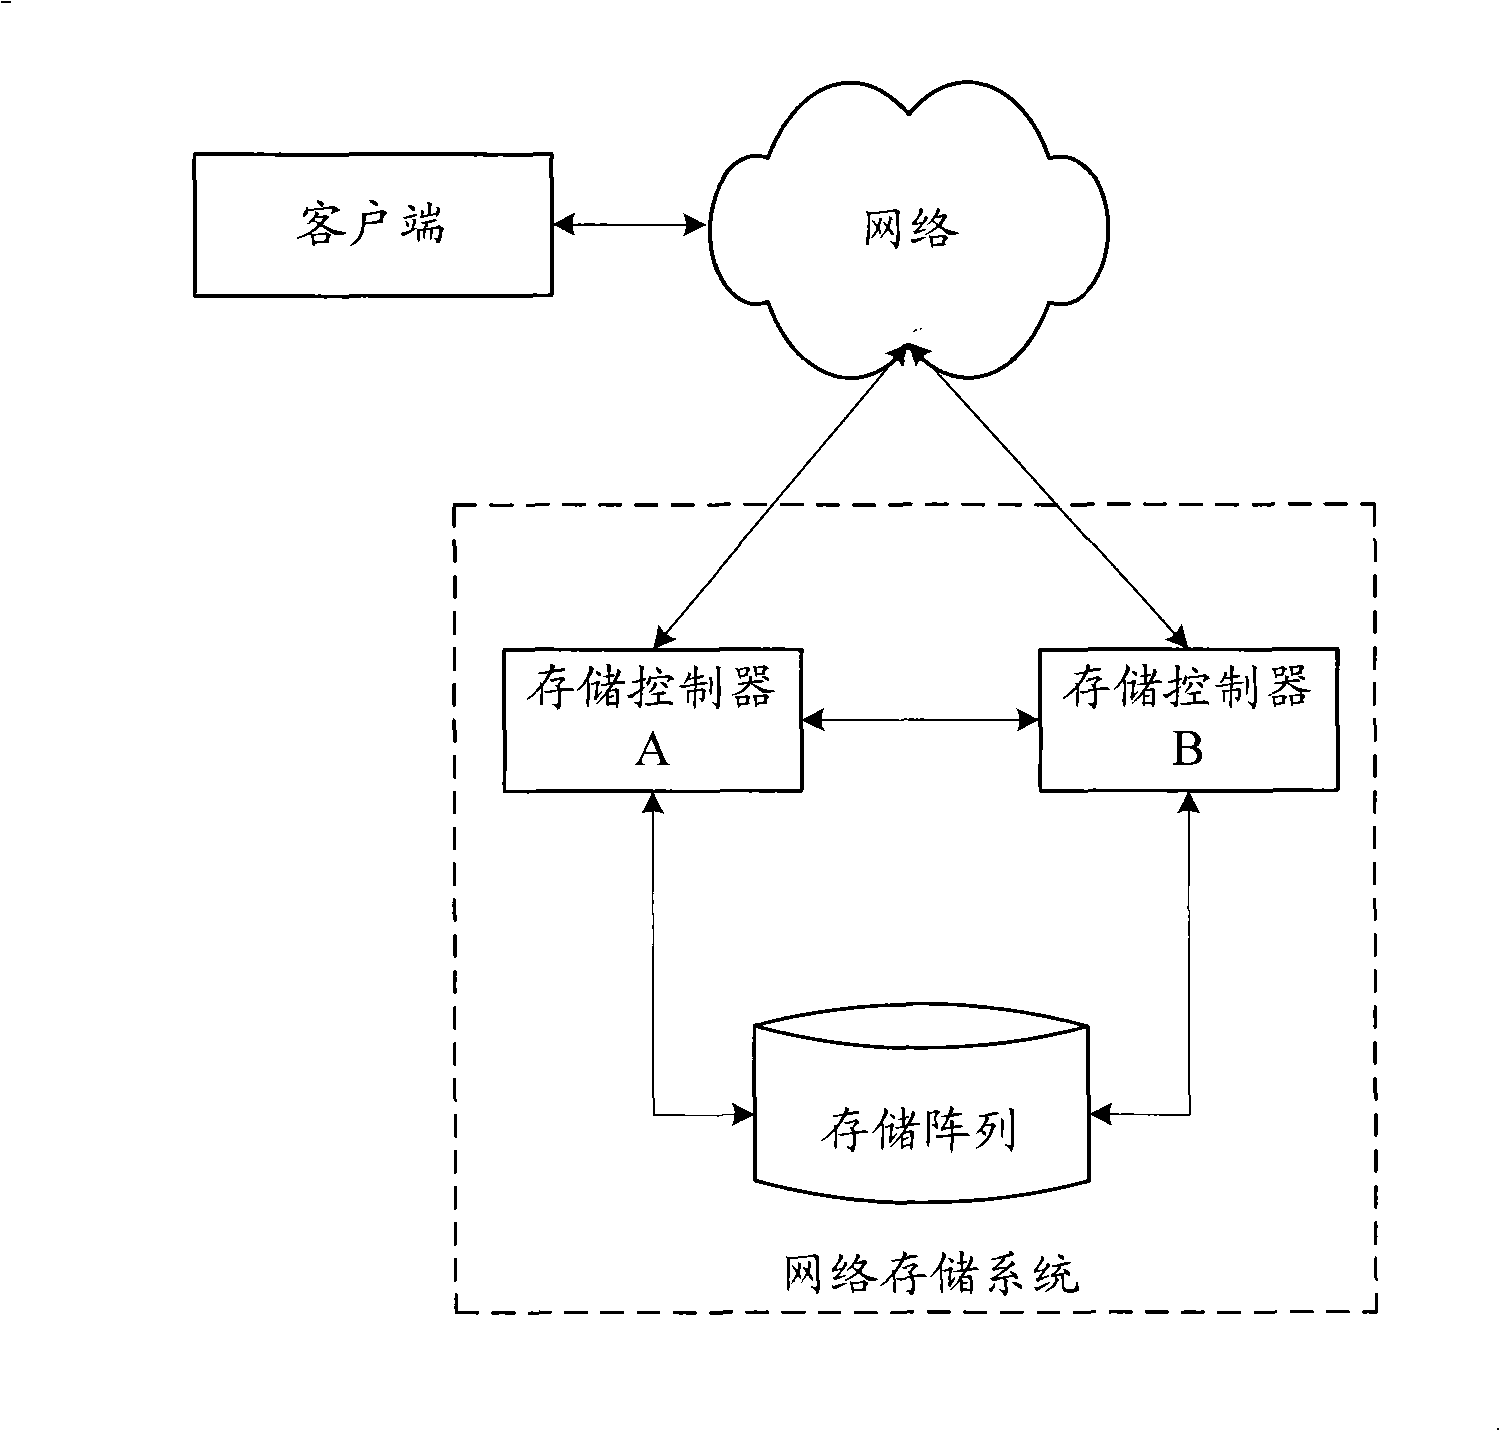 Heartbeat detection method and heartbeat detection apparatus